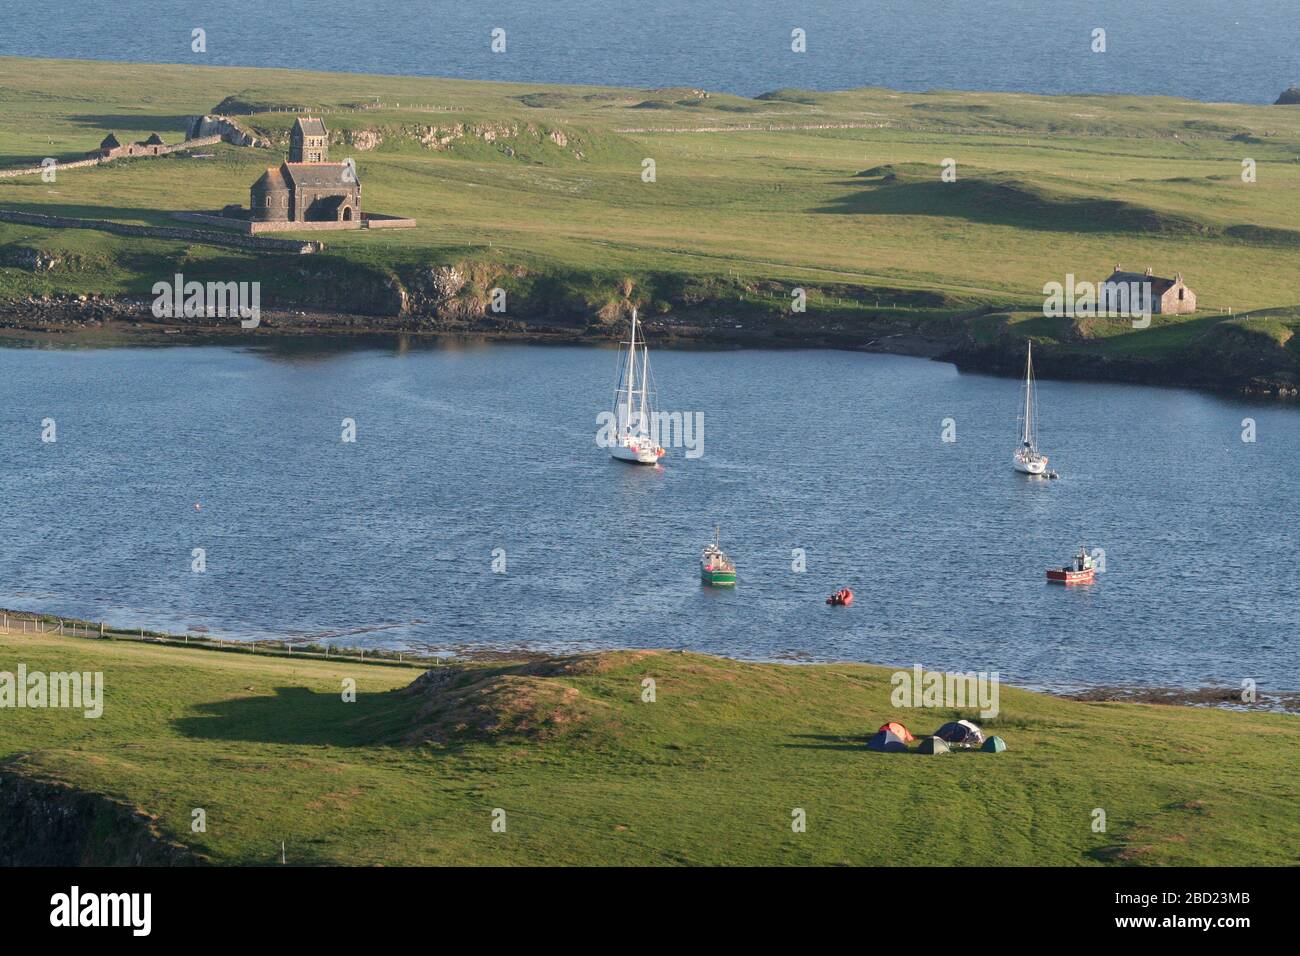 Sailing yachts and fishing boats in Canna harbour, looking across to the church on Sanday from Canna, Hebrides, Scotland Stock Photo